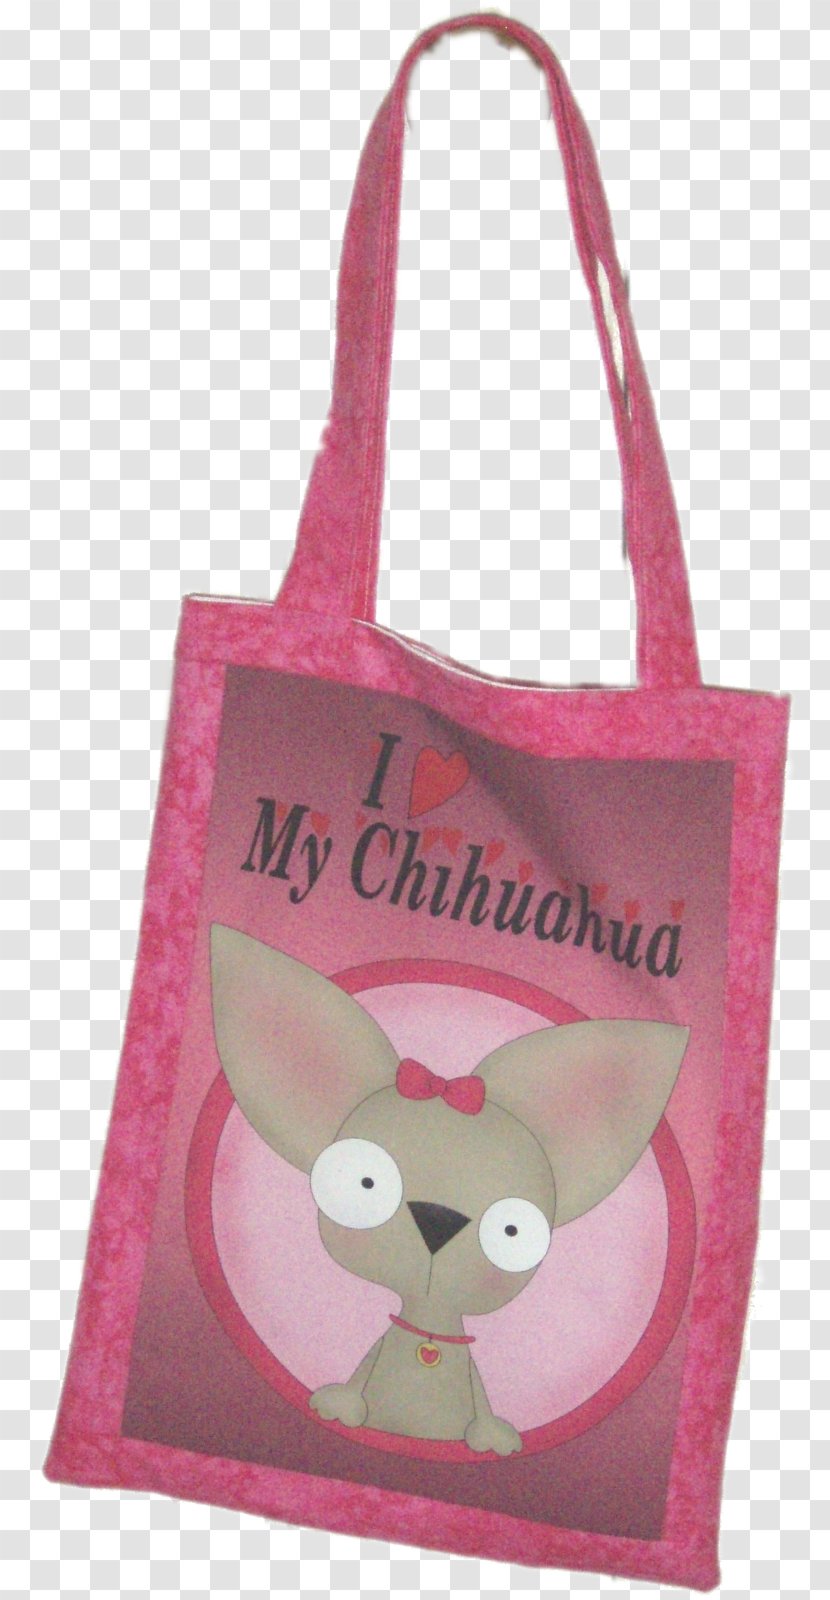 Tote Bag Chihuahua Puppy Shopping Bags & Trolleys Transparent PNG